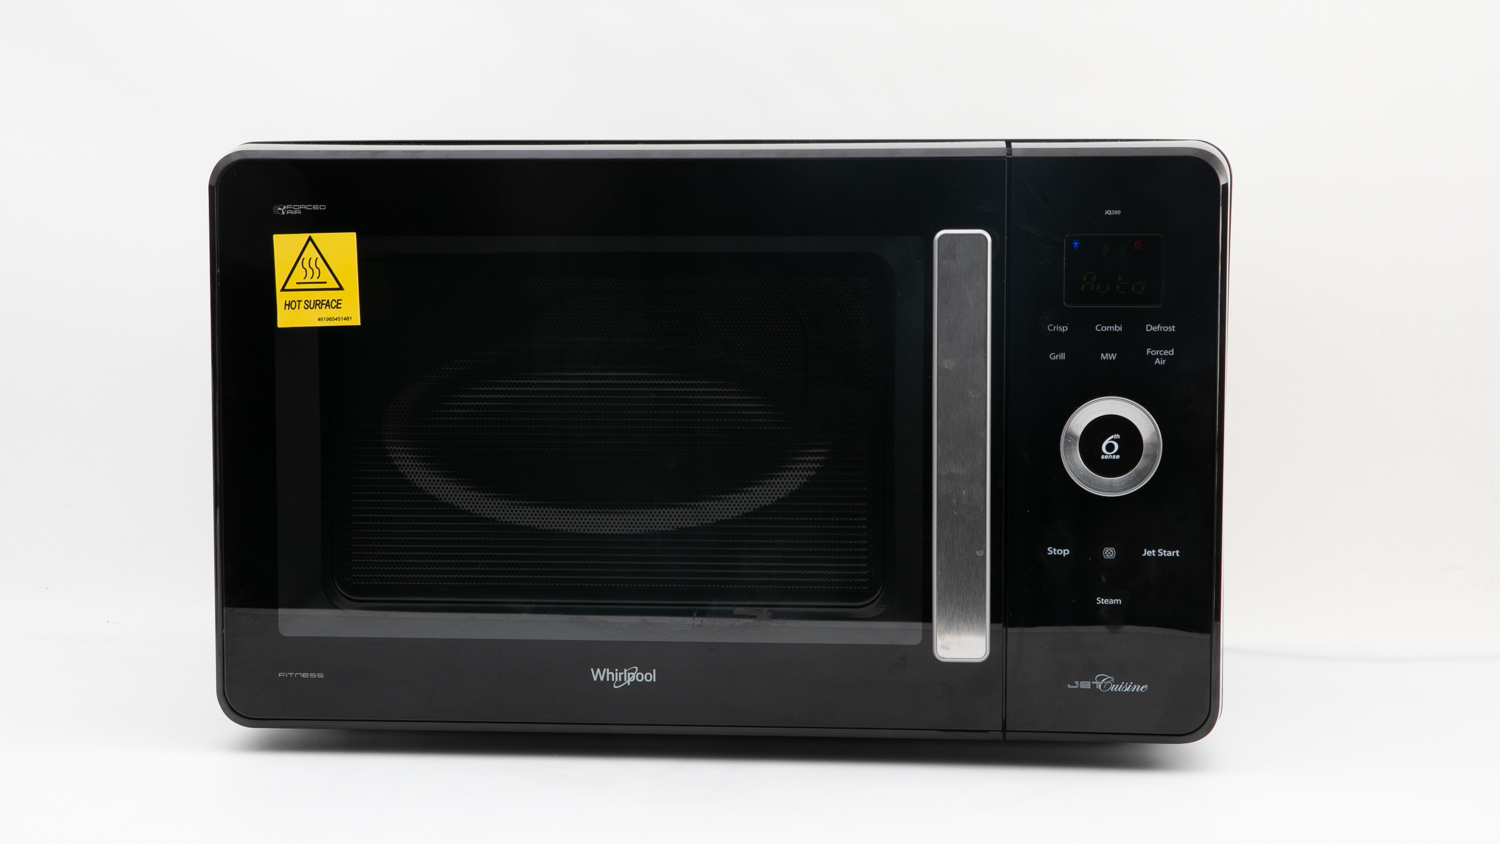 Whirlpool Crisp 'n' Grill Convection Microwave JQ280BL carousel image